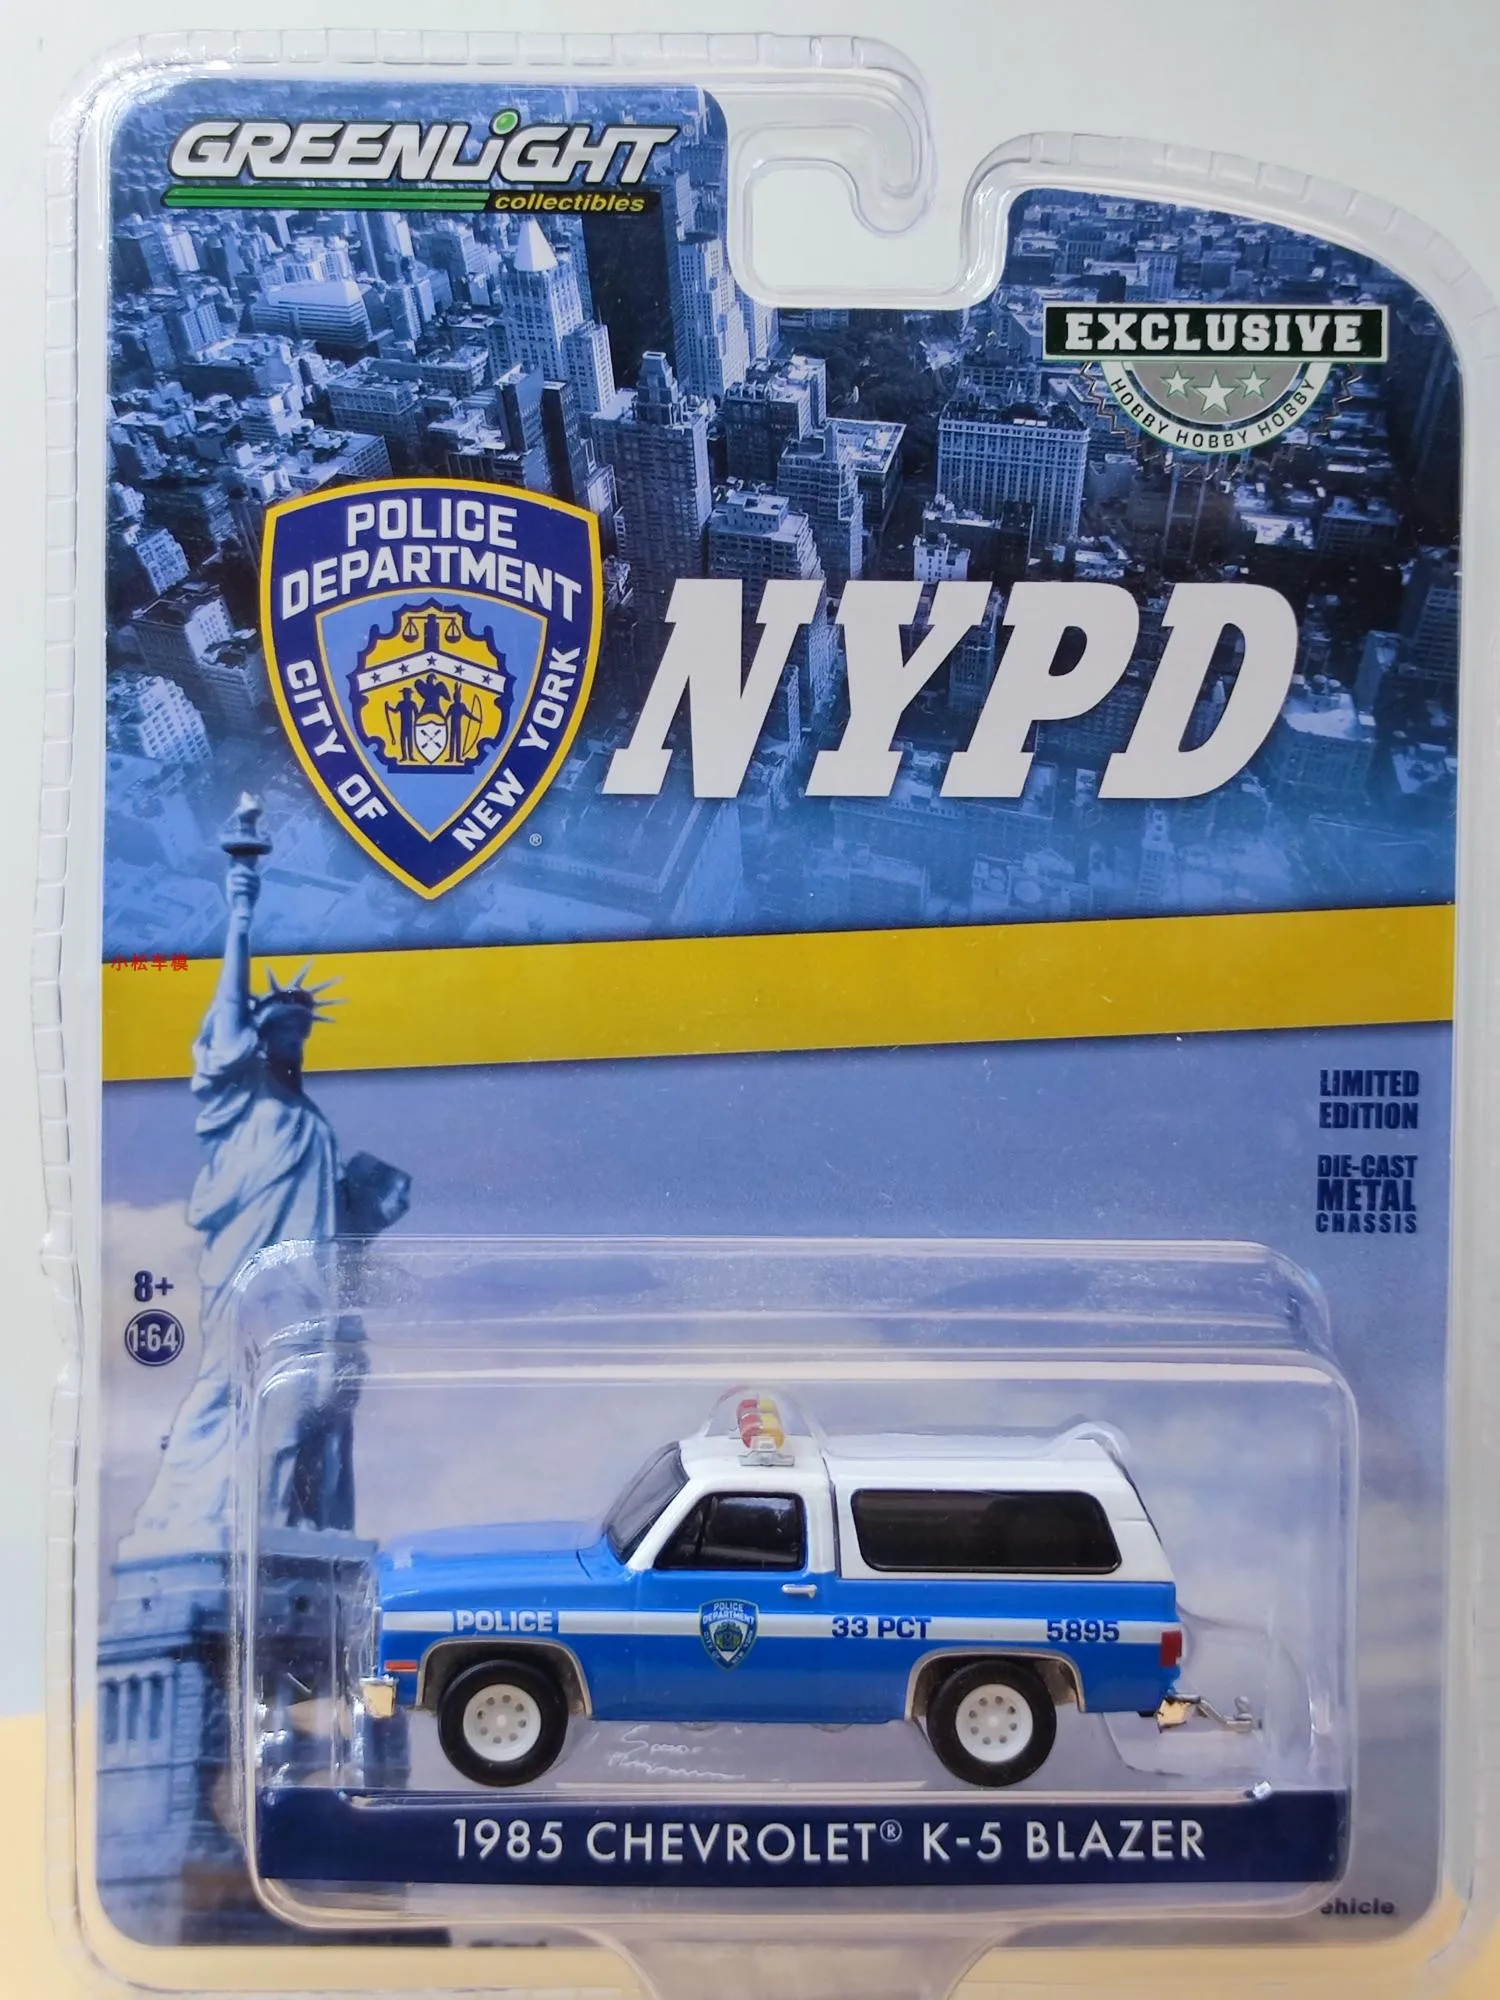 

Nicce 1:64 1985 Chevrolet K-5 Trailblazer - NYPD Car Model Diecast Metal Alloy Model Car Toys for Collection Kids Toy Gifts